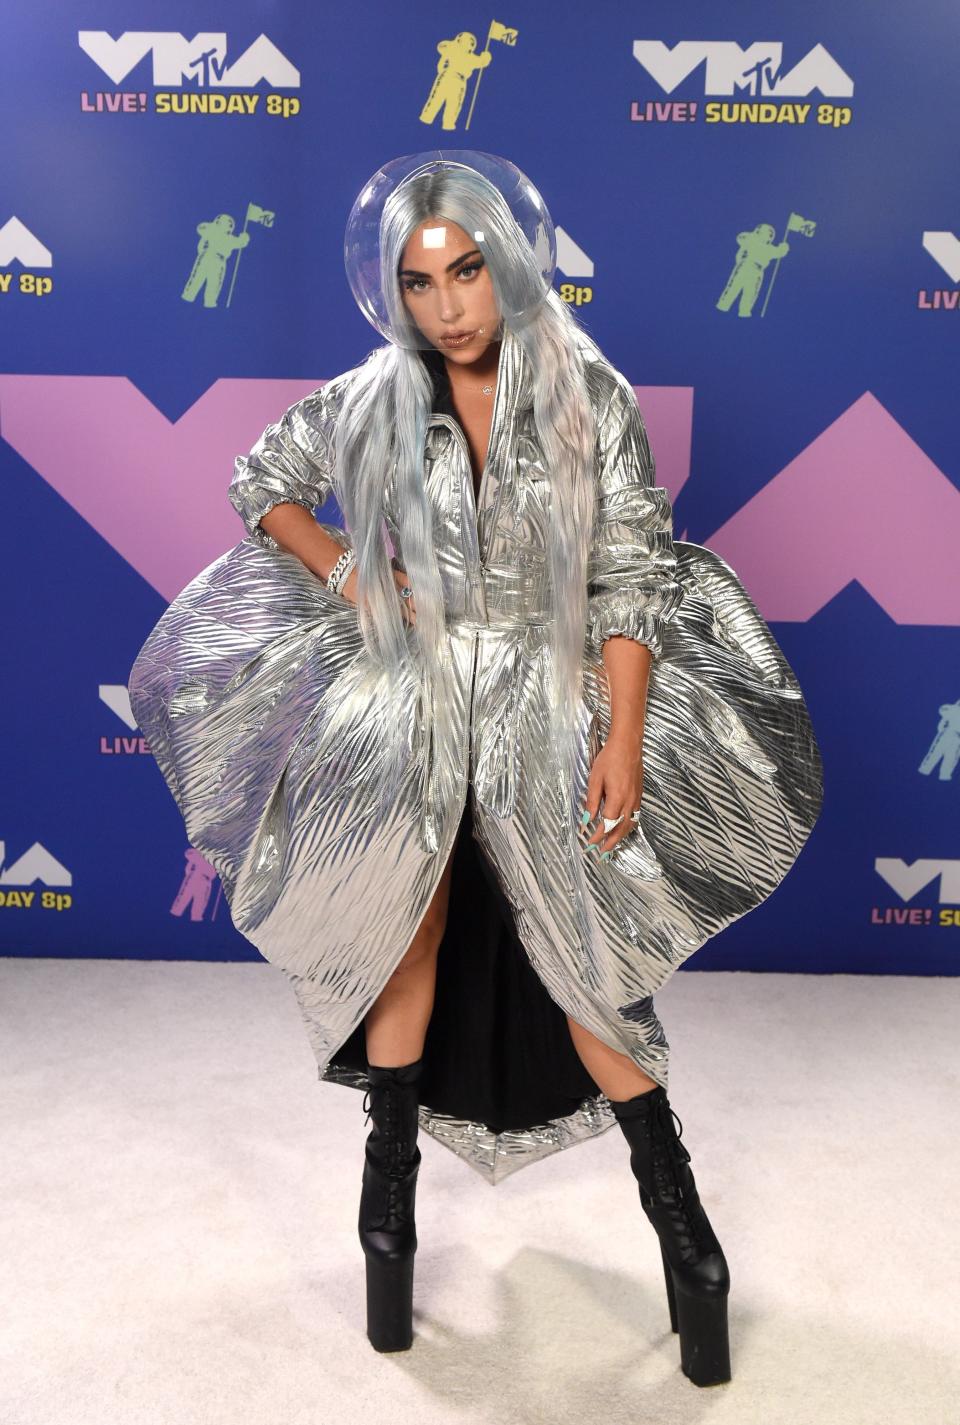 Lady Gaga kept her red carpet outfit COVID-safe with what looked like a space helmet with a futuristic silver dress. Photo: Getty